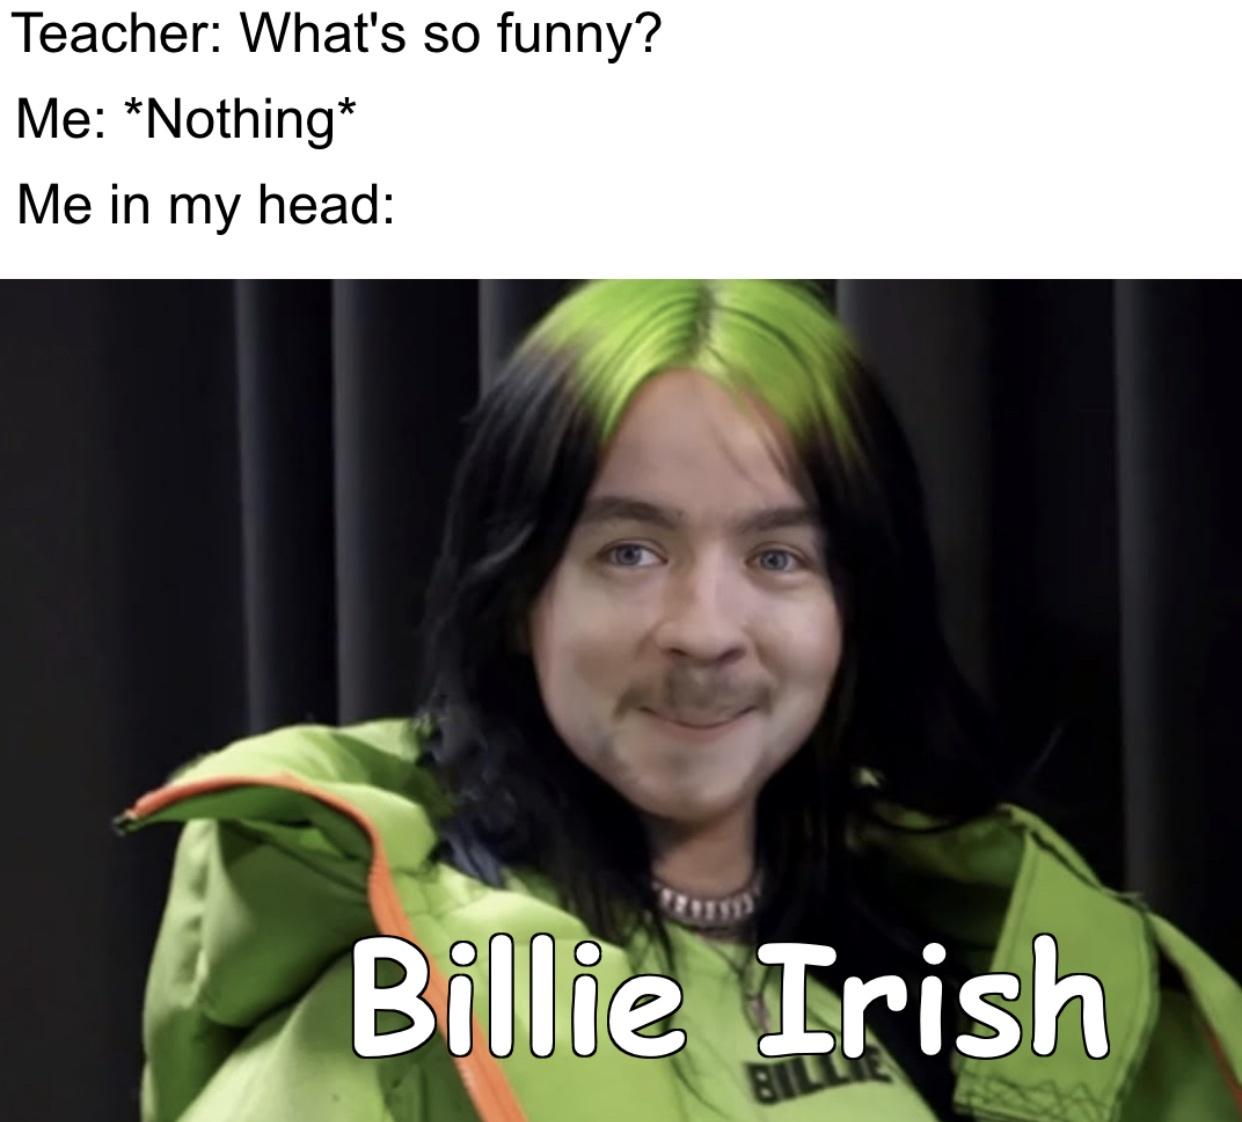 photo caption - Teacher What's so funny? Me Nothing Me in my head Billie Irish